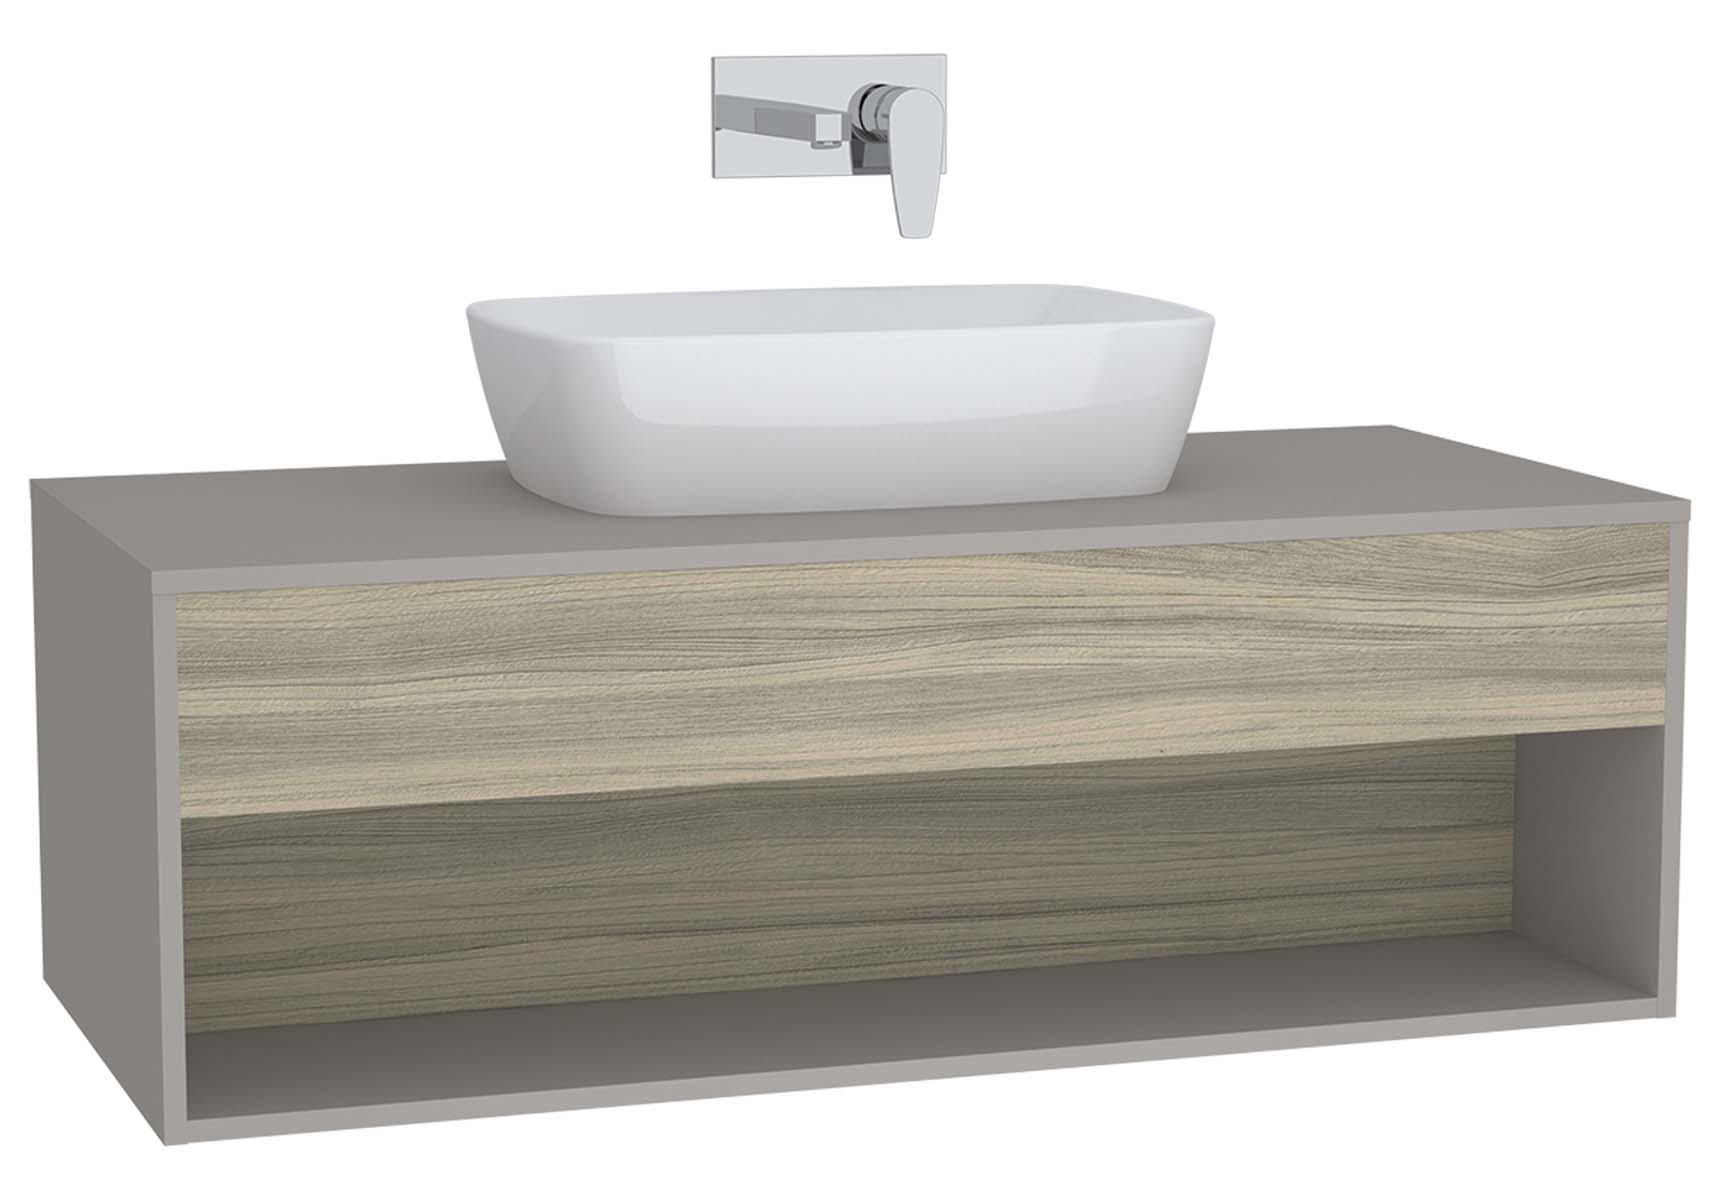 Integra Hotel Unit, 120 cm, for countertop basins, with 53 cm depth, Grey Elm & Gritstone, middle